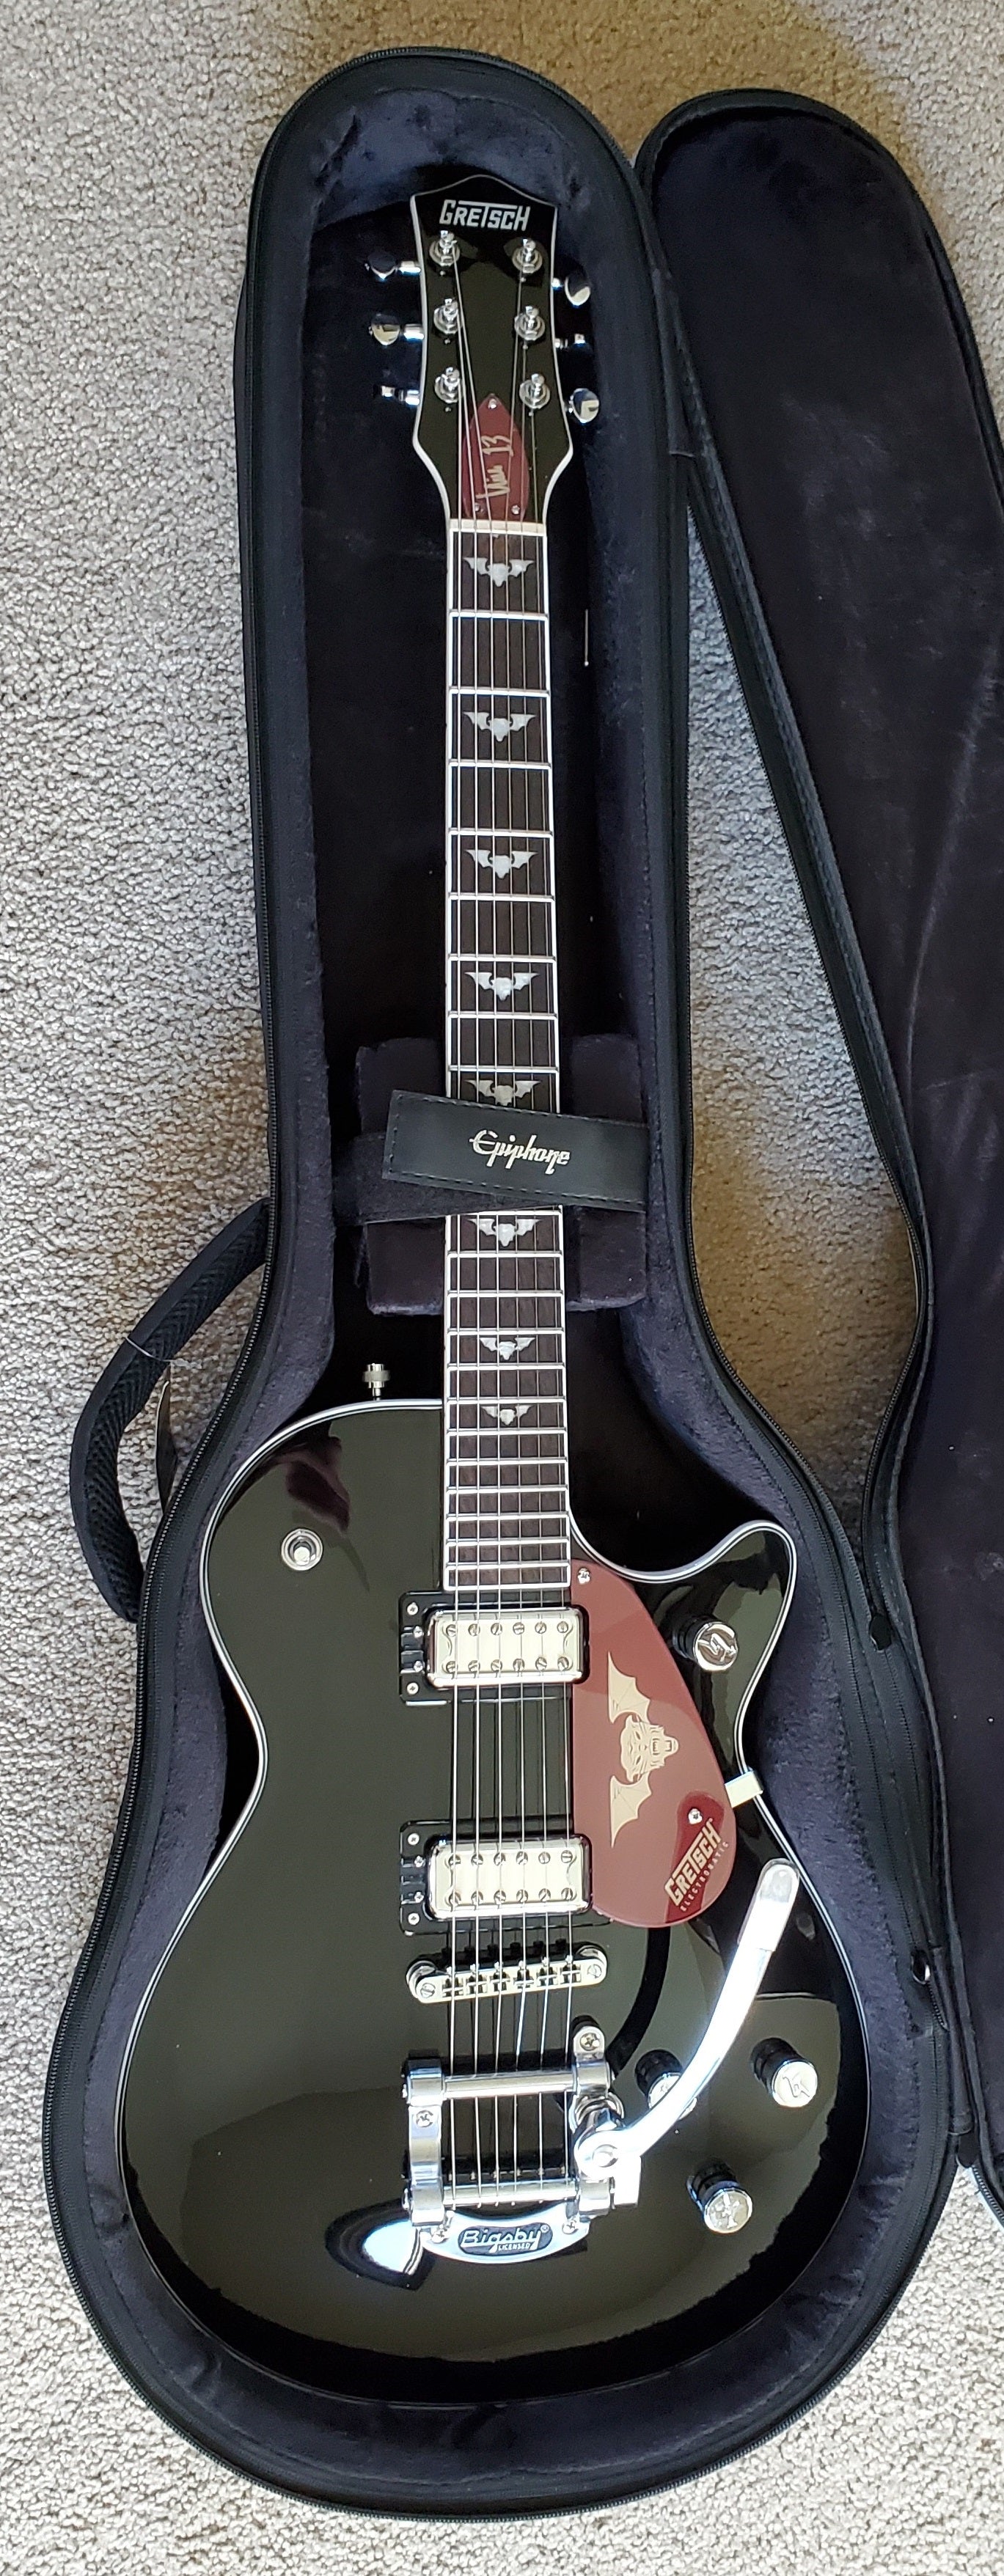 Gretsch G5230T Nick 13 Signature Electromatic Tiger Jet Electric Guitar, Bigsby, EpiLite Case